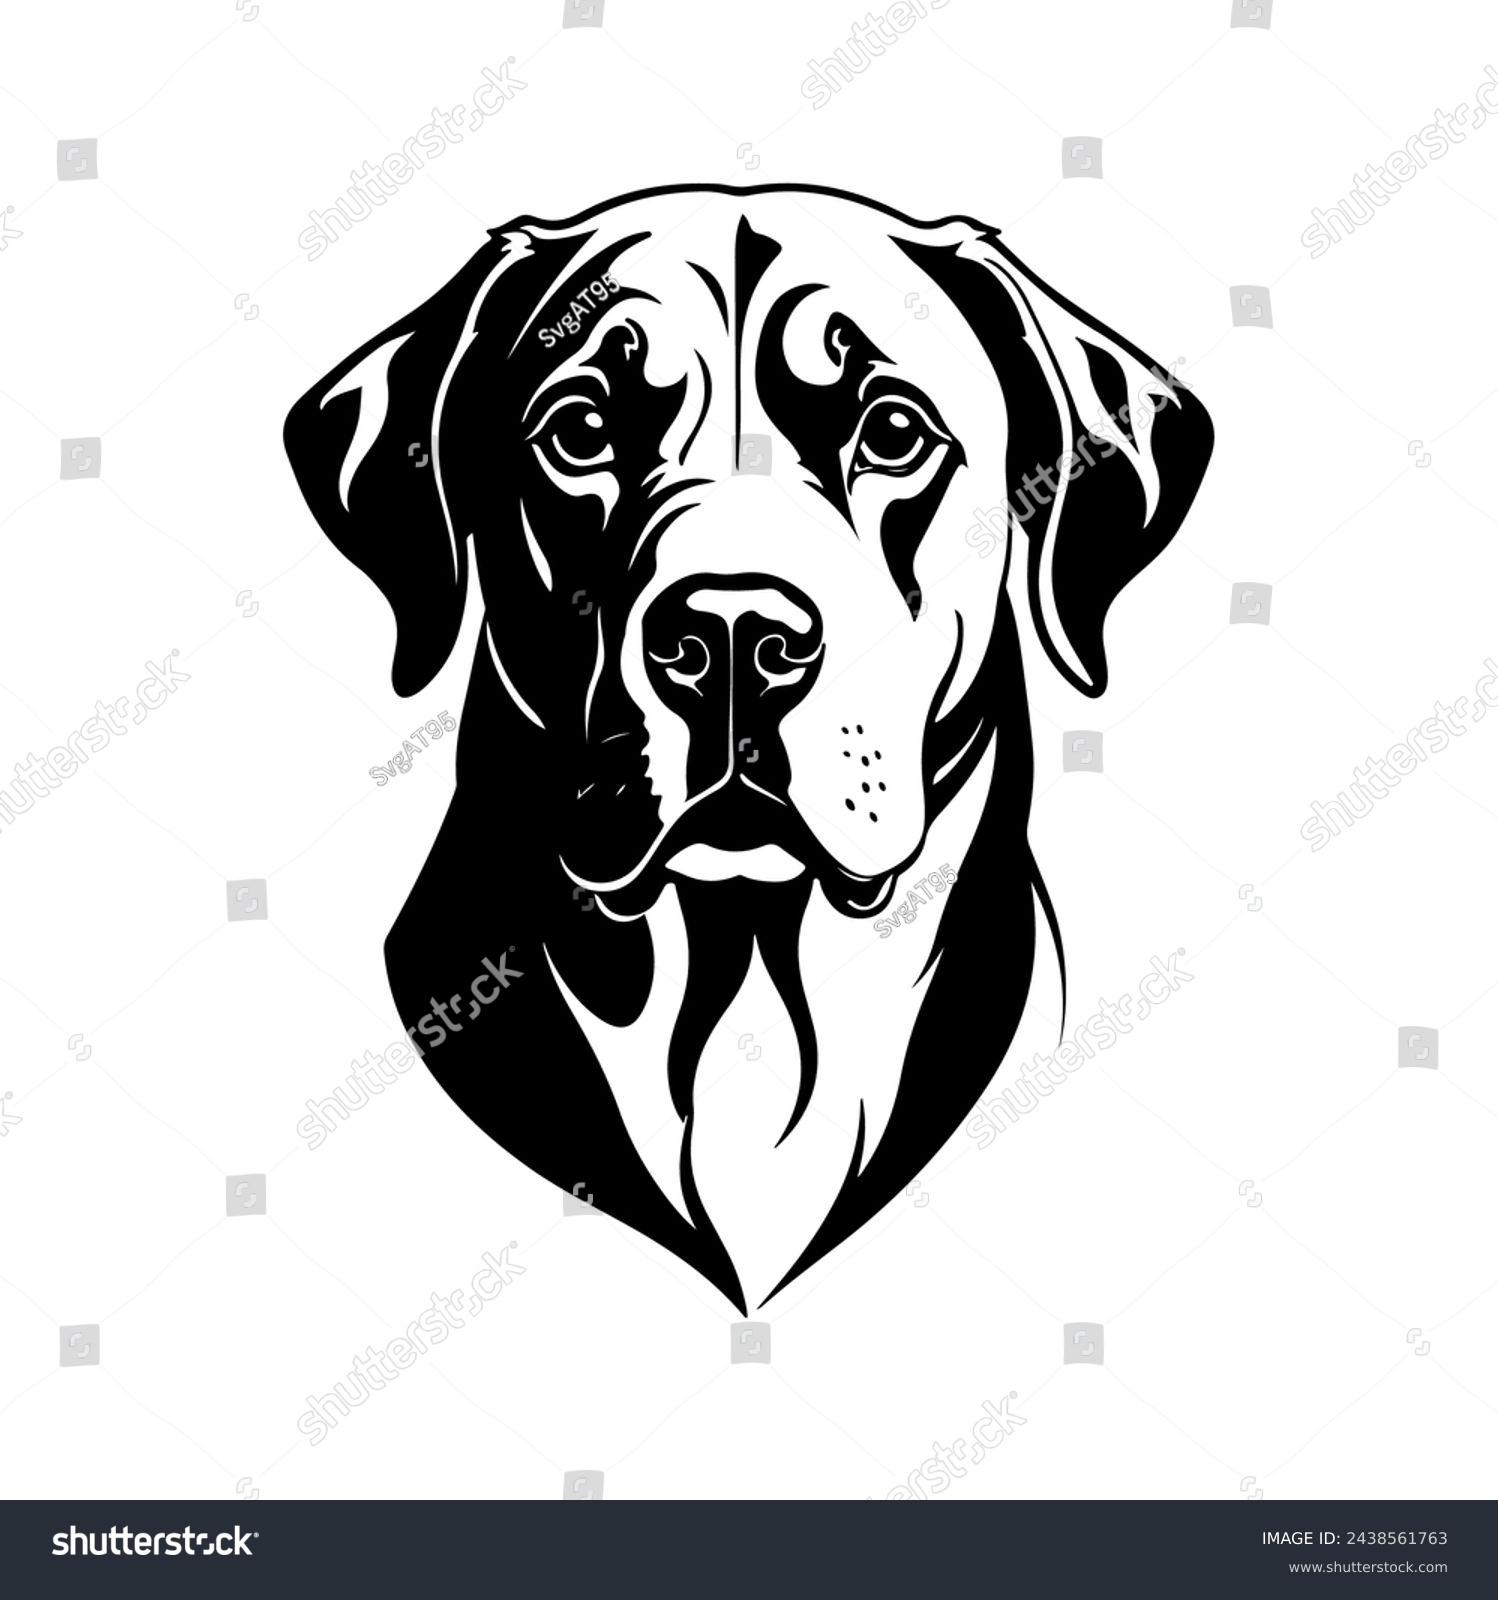 SVG of Portrait of a Great Dane Dog Vector isolated on white background, Dog Silhouettes. svg